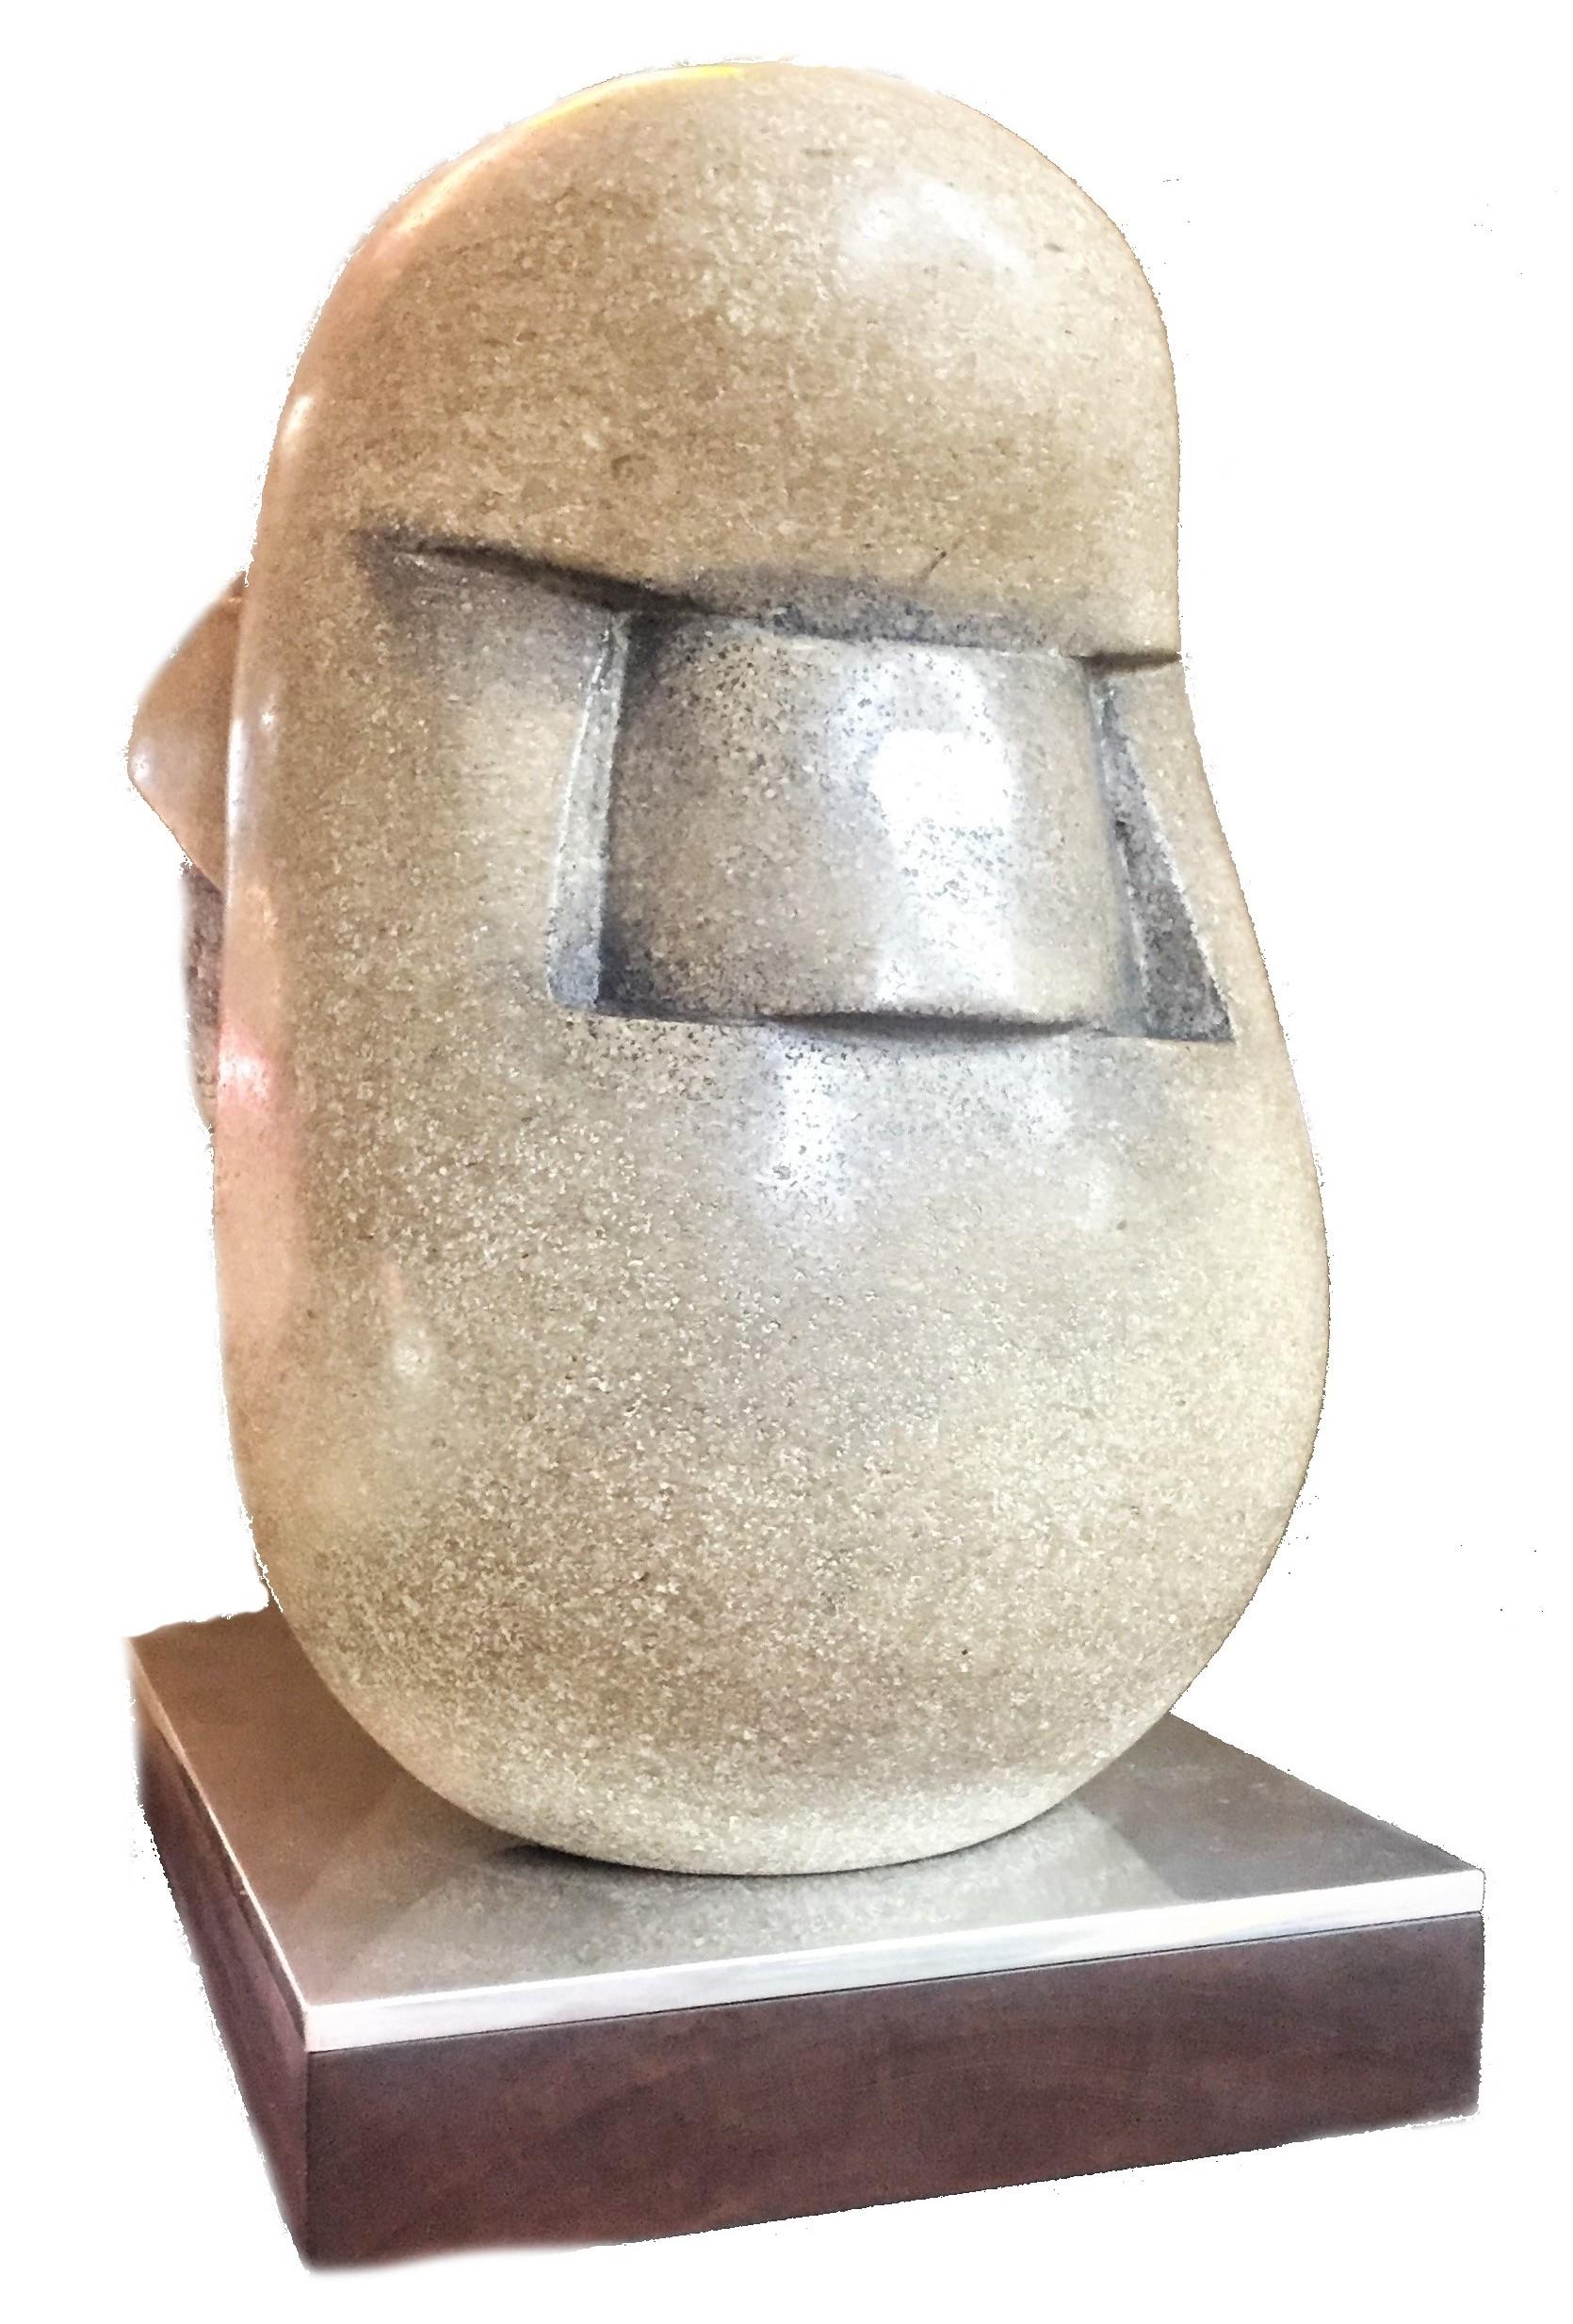 Modern Lilly M. Tussey, Centurion, Limestone & Paint Abstract Sculpture, circa 1970s